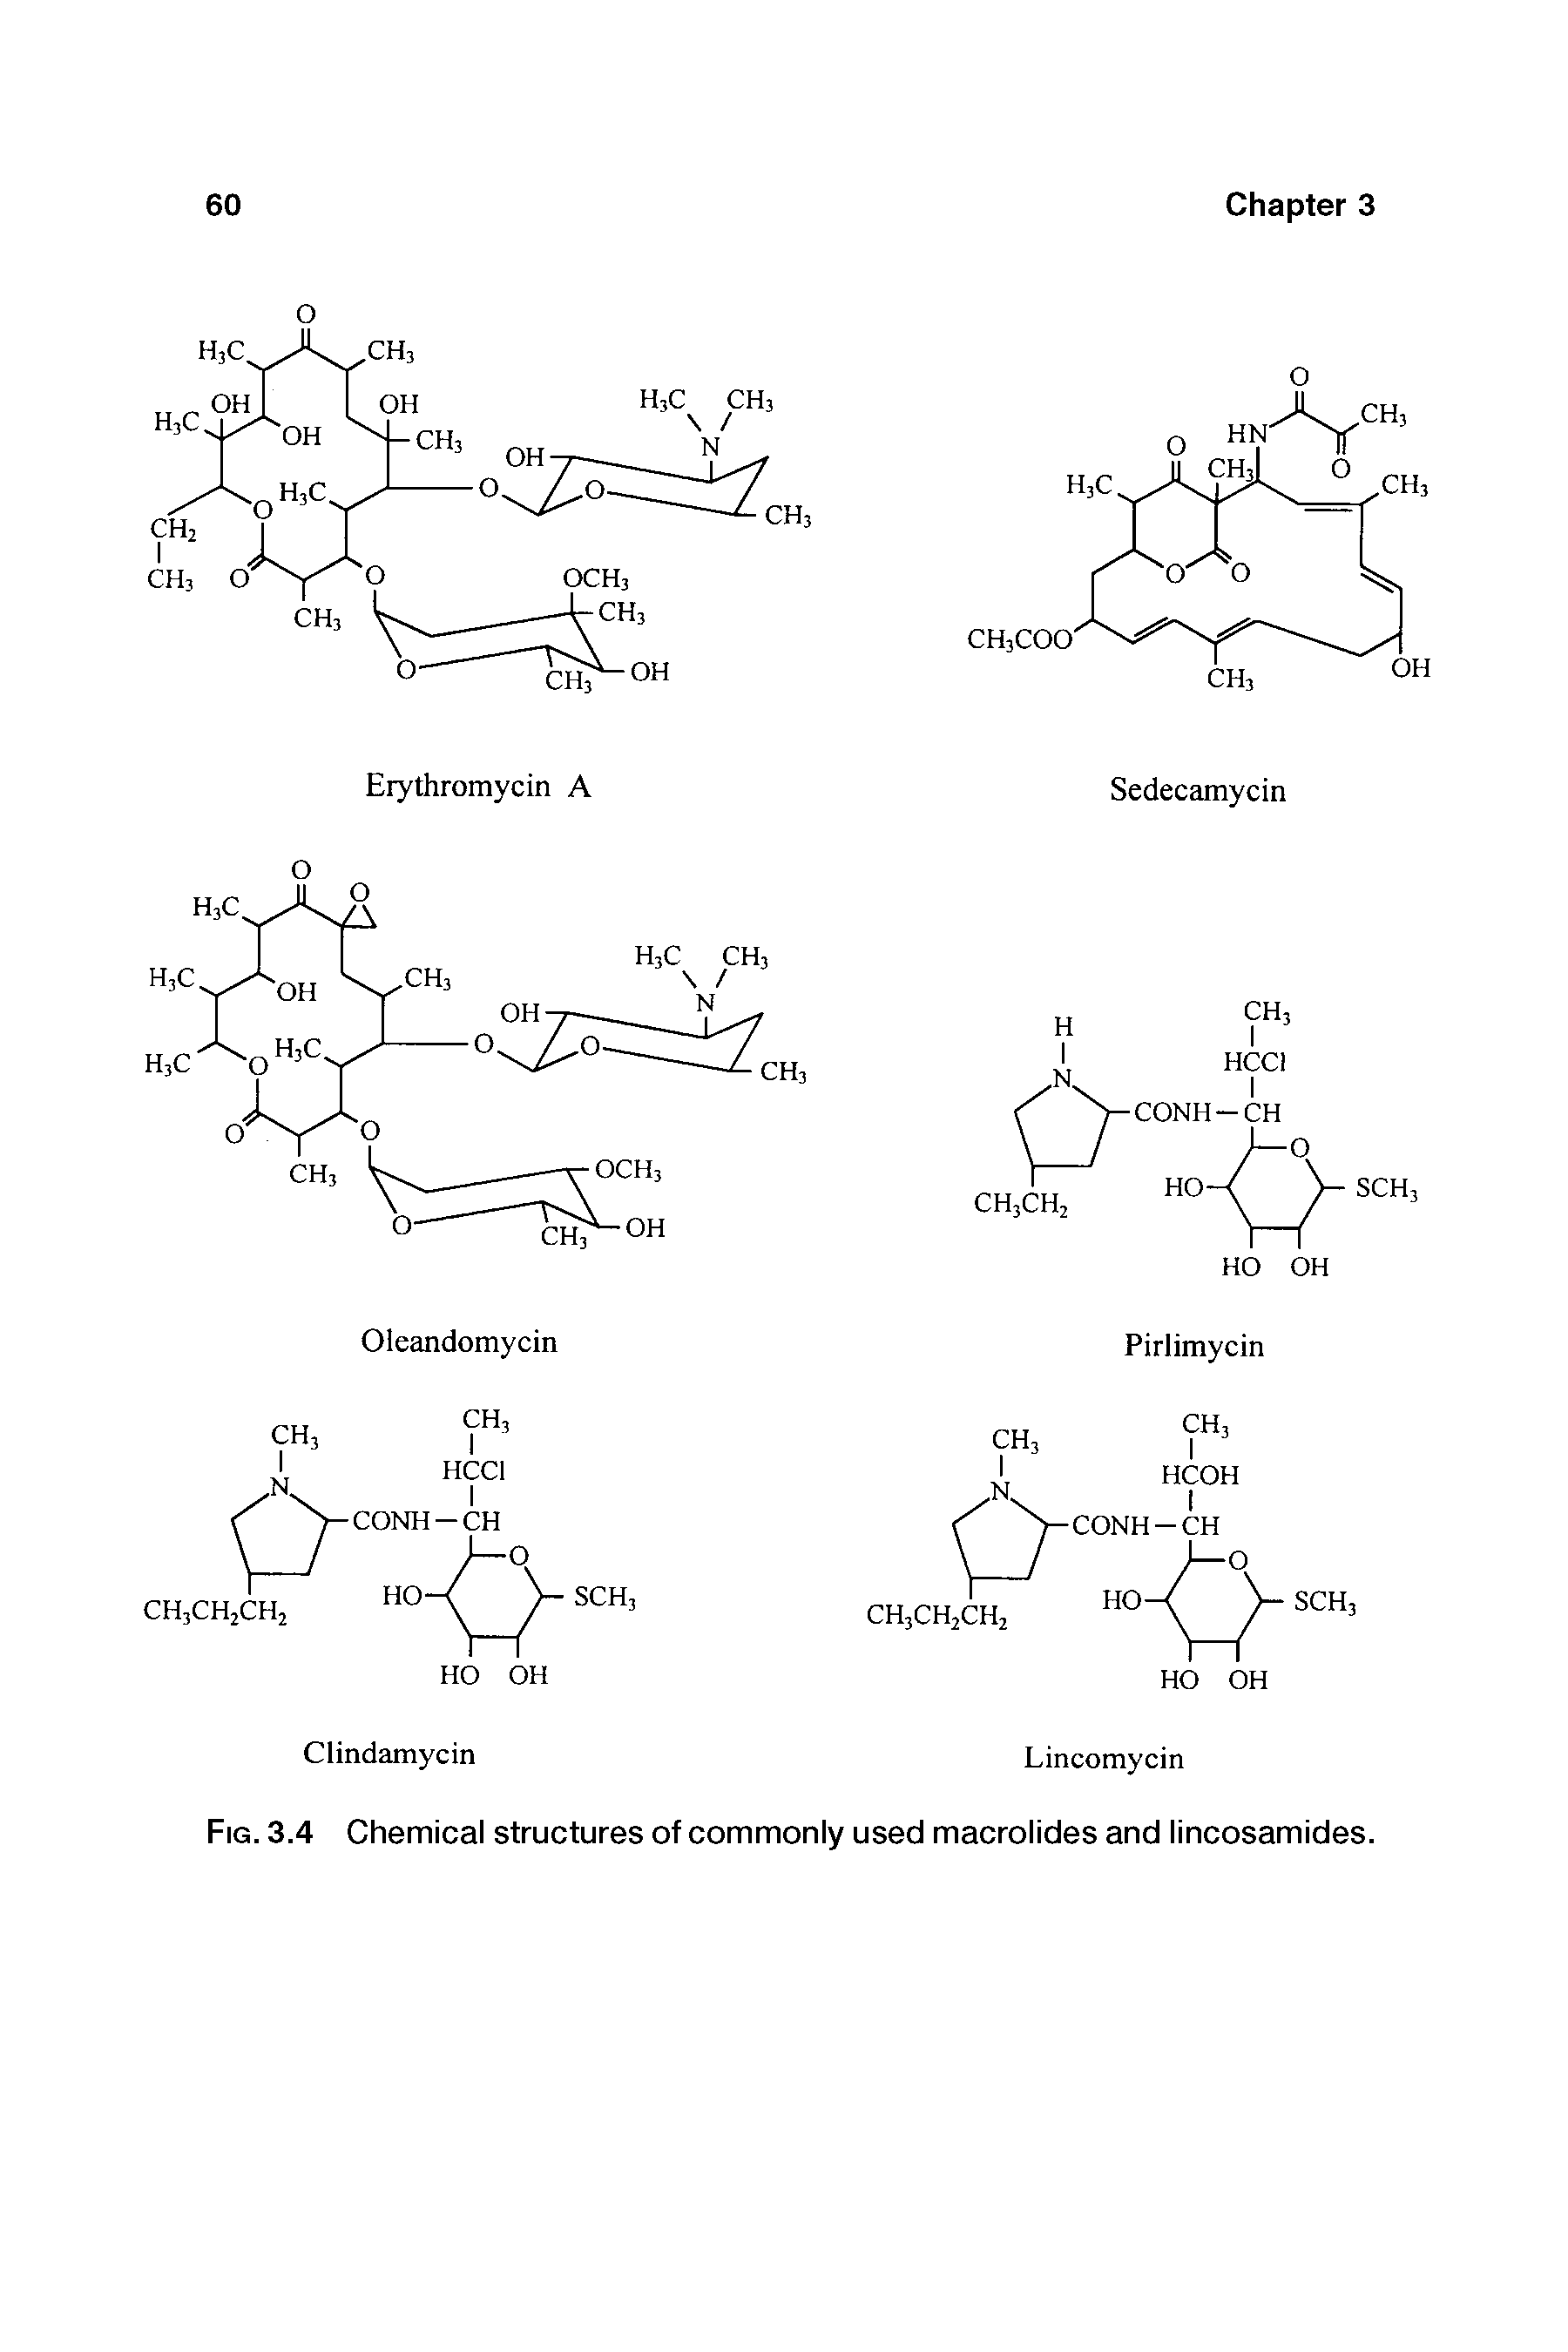 Fig. 3.4 Chemical structures of commonly used macrolides and lincosamides.